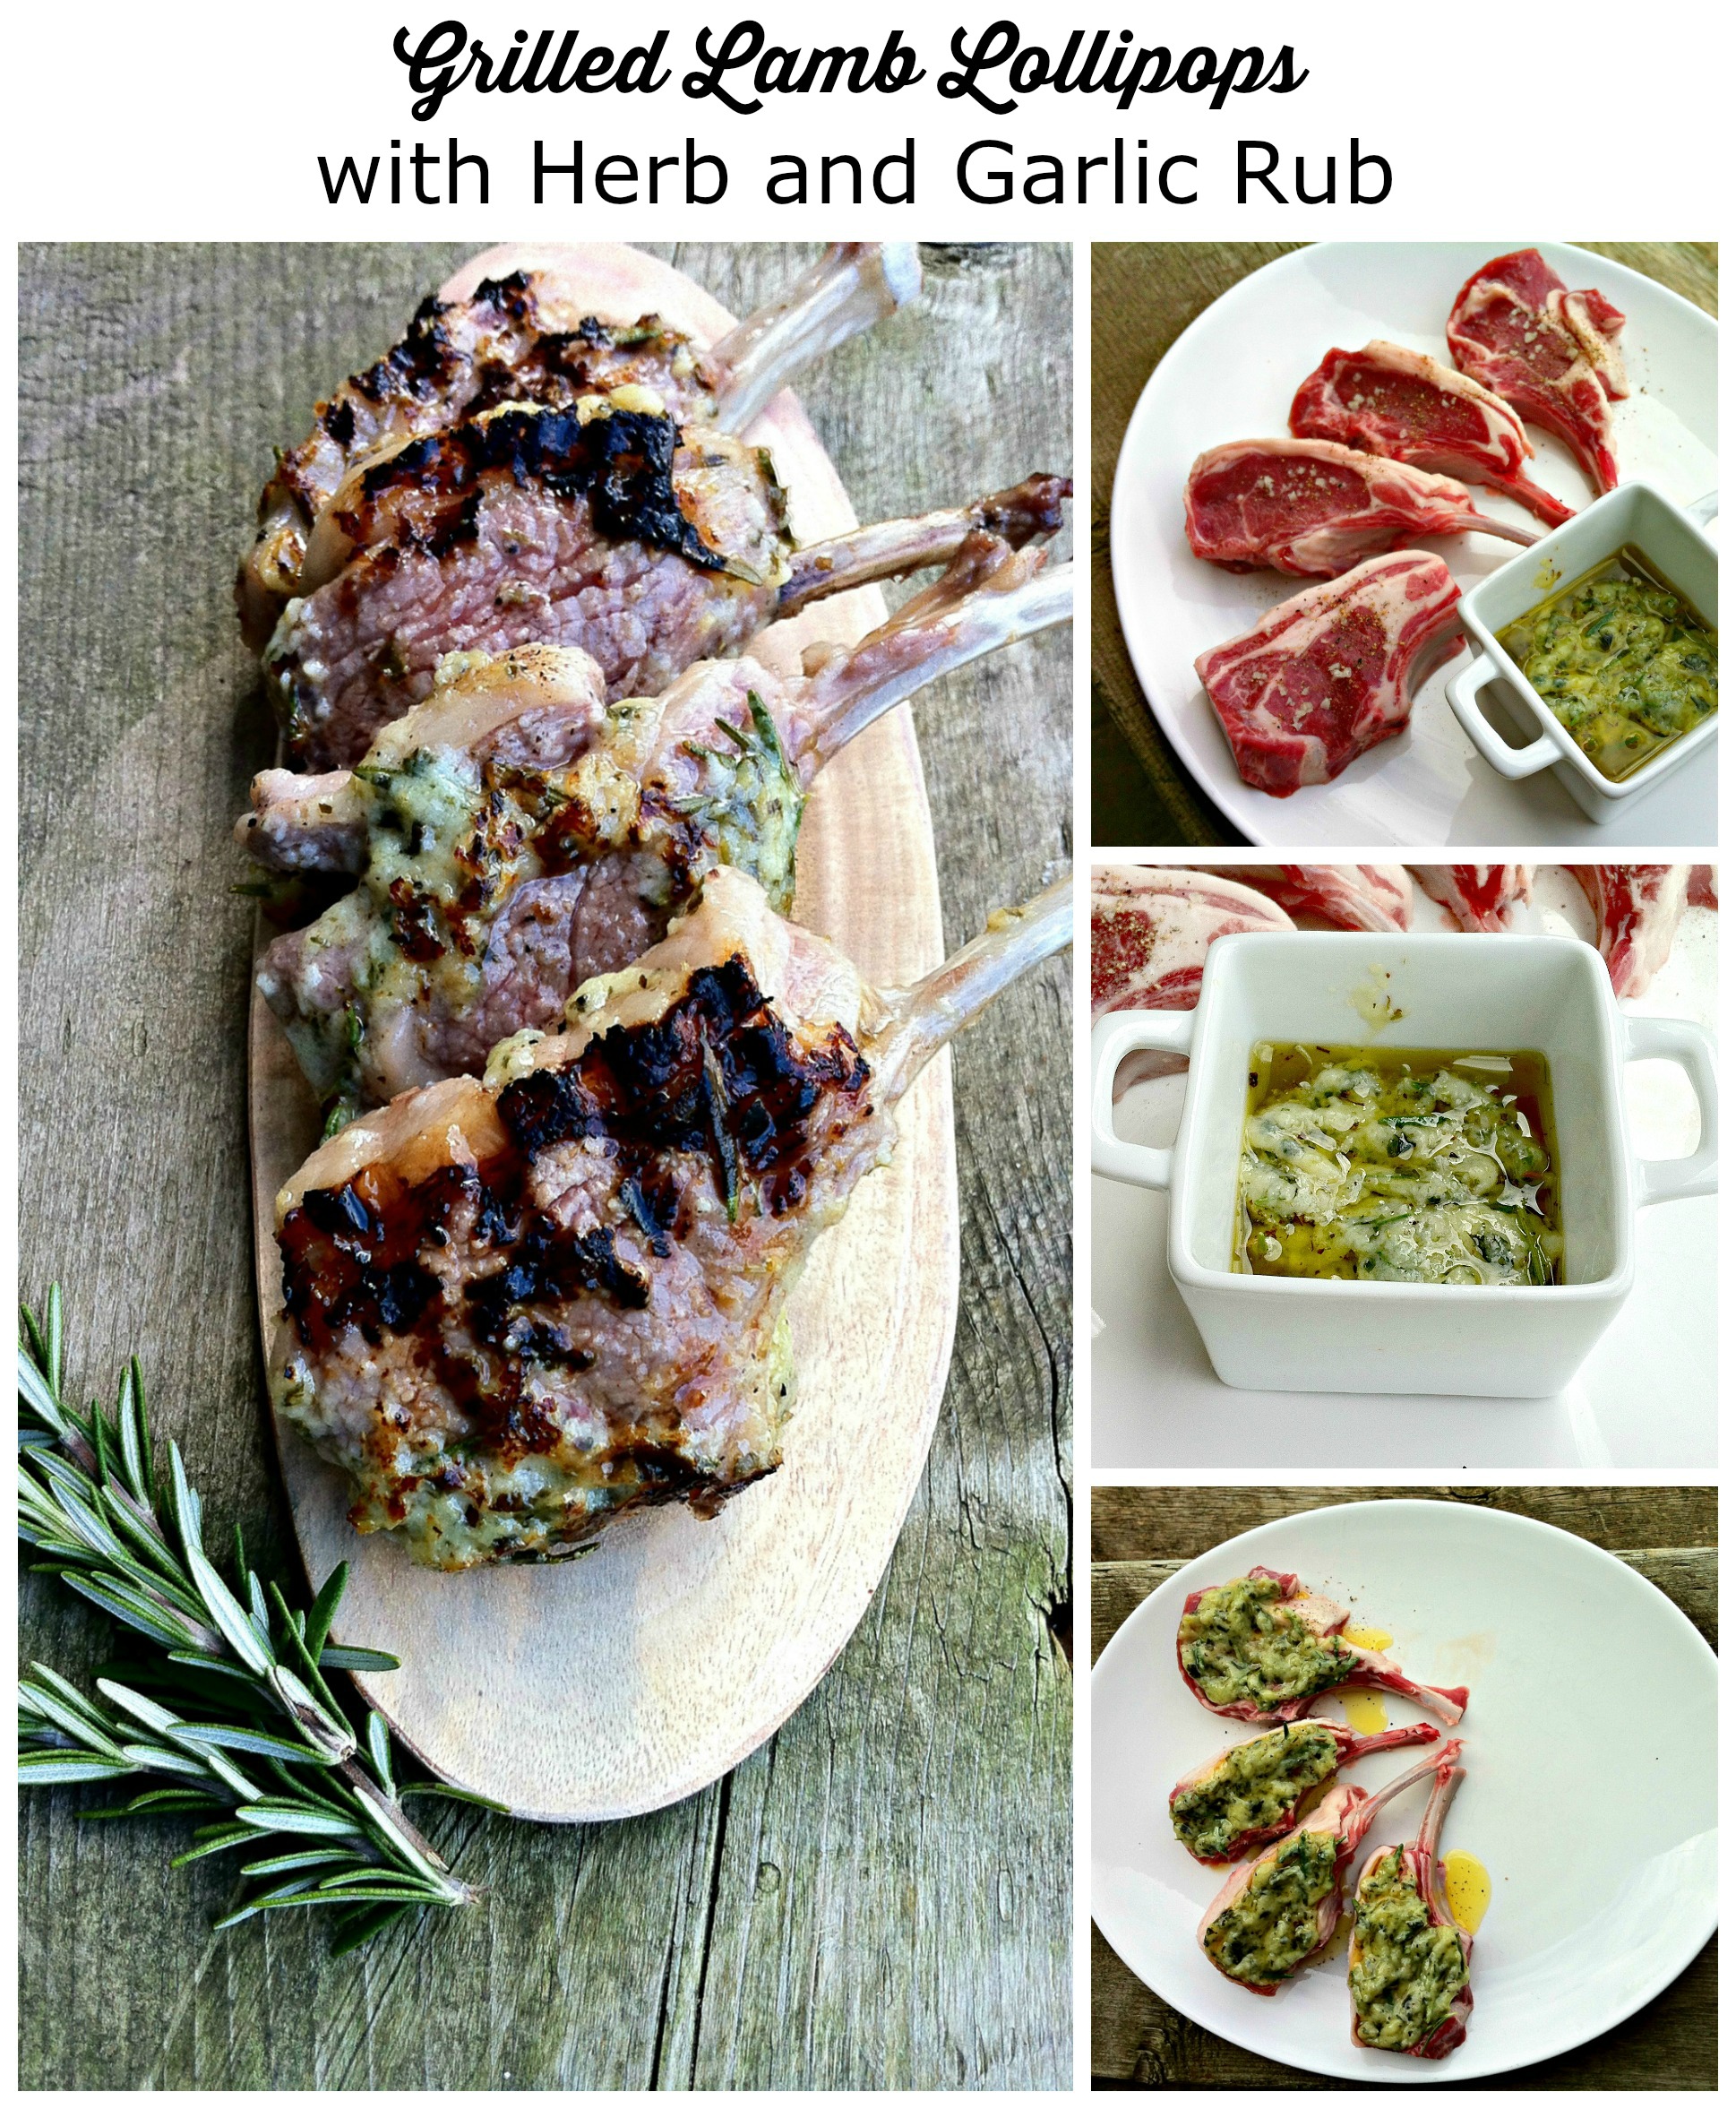 Grilled Lamb Lollipops with Herb and Garlic Rub Marinade